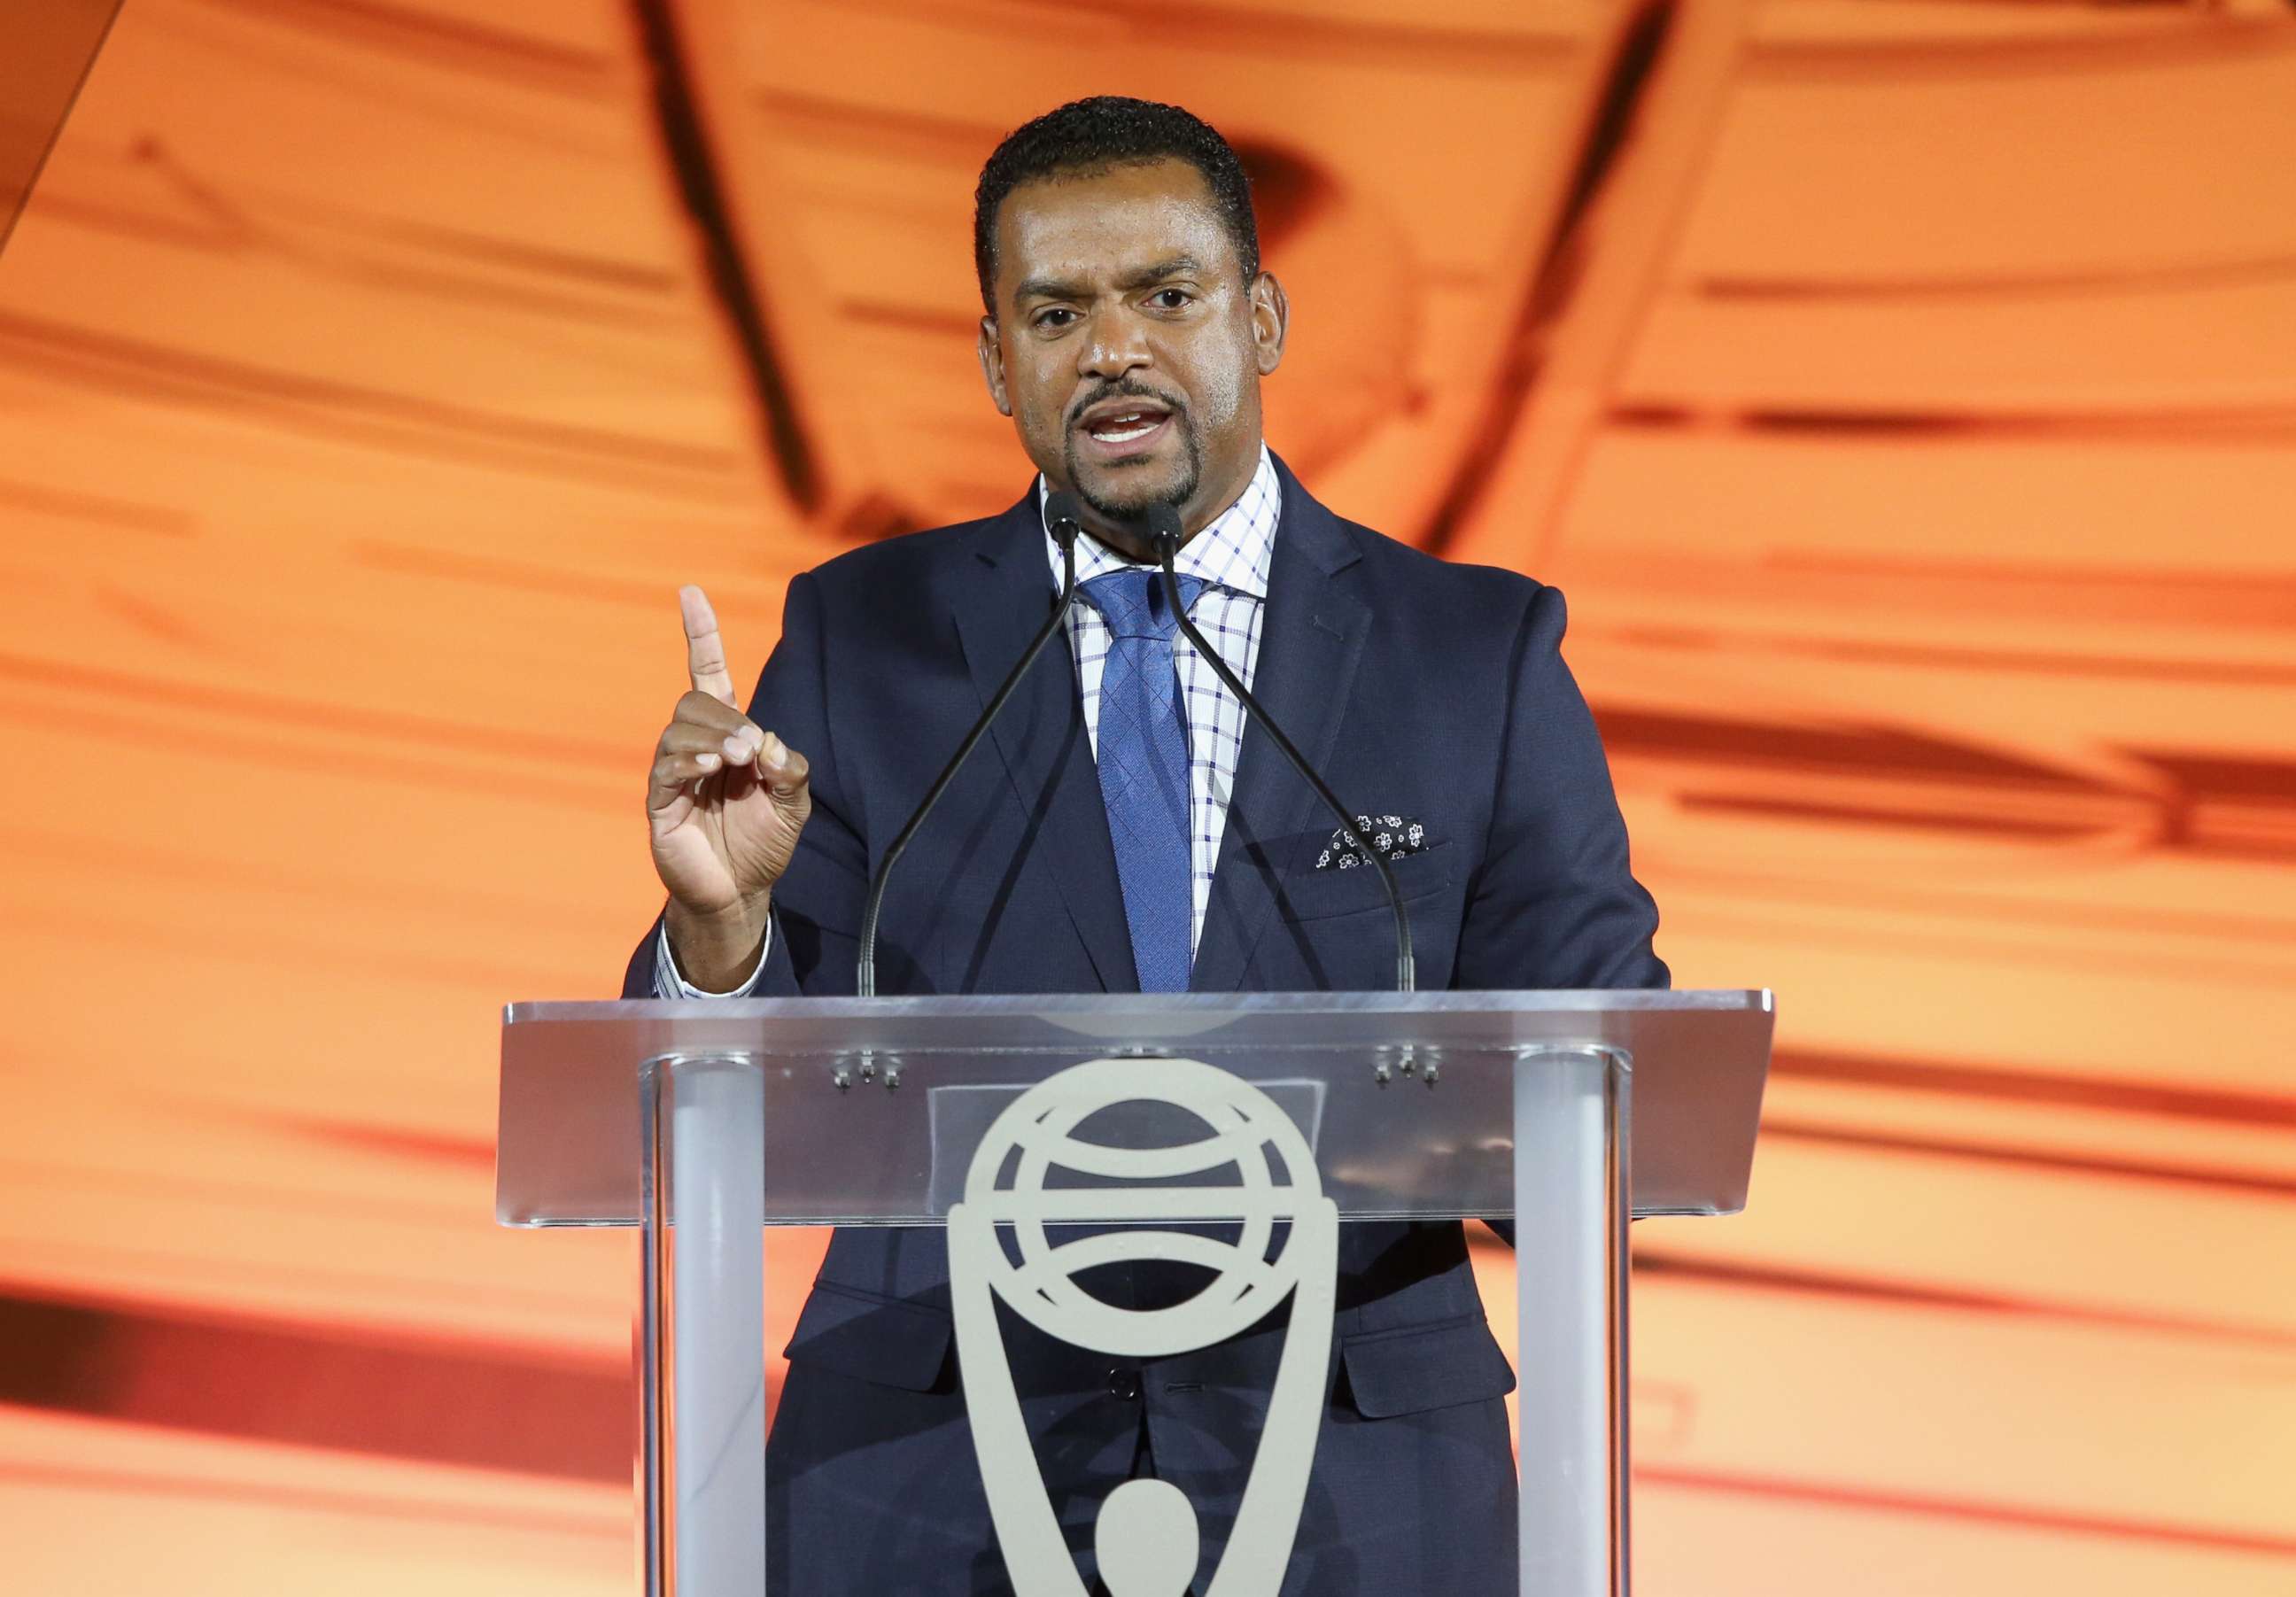 PHOTO: Alfonso Ribeiro speaks onstage during the Clio Entertainment Awards 2018 at Dolby Theatre on Nov. 15, 2018 in Hollywood, Calif.